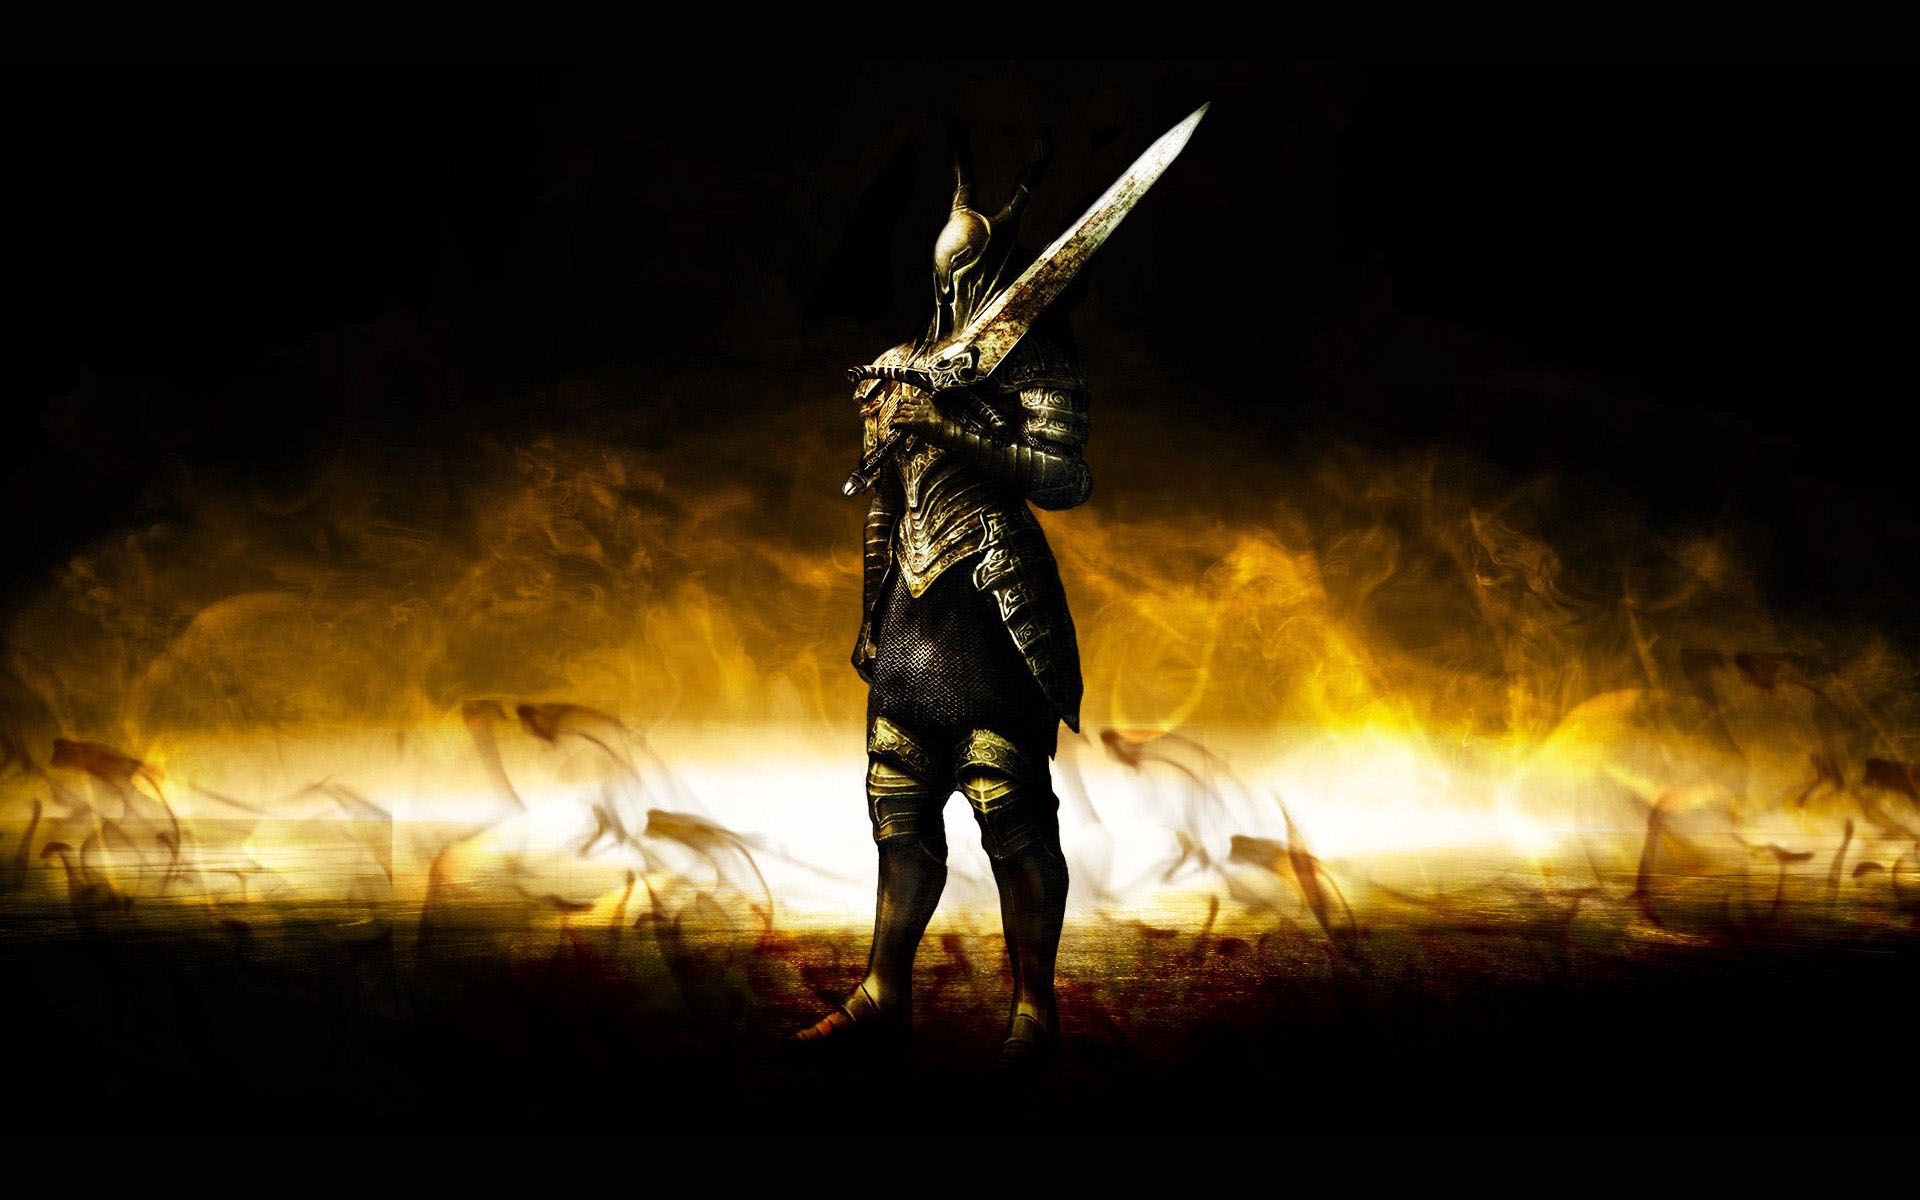 free-download-find-the-dark-souls-2-hd-wallpapers-which-is-now